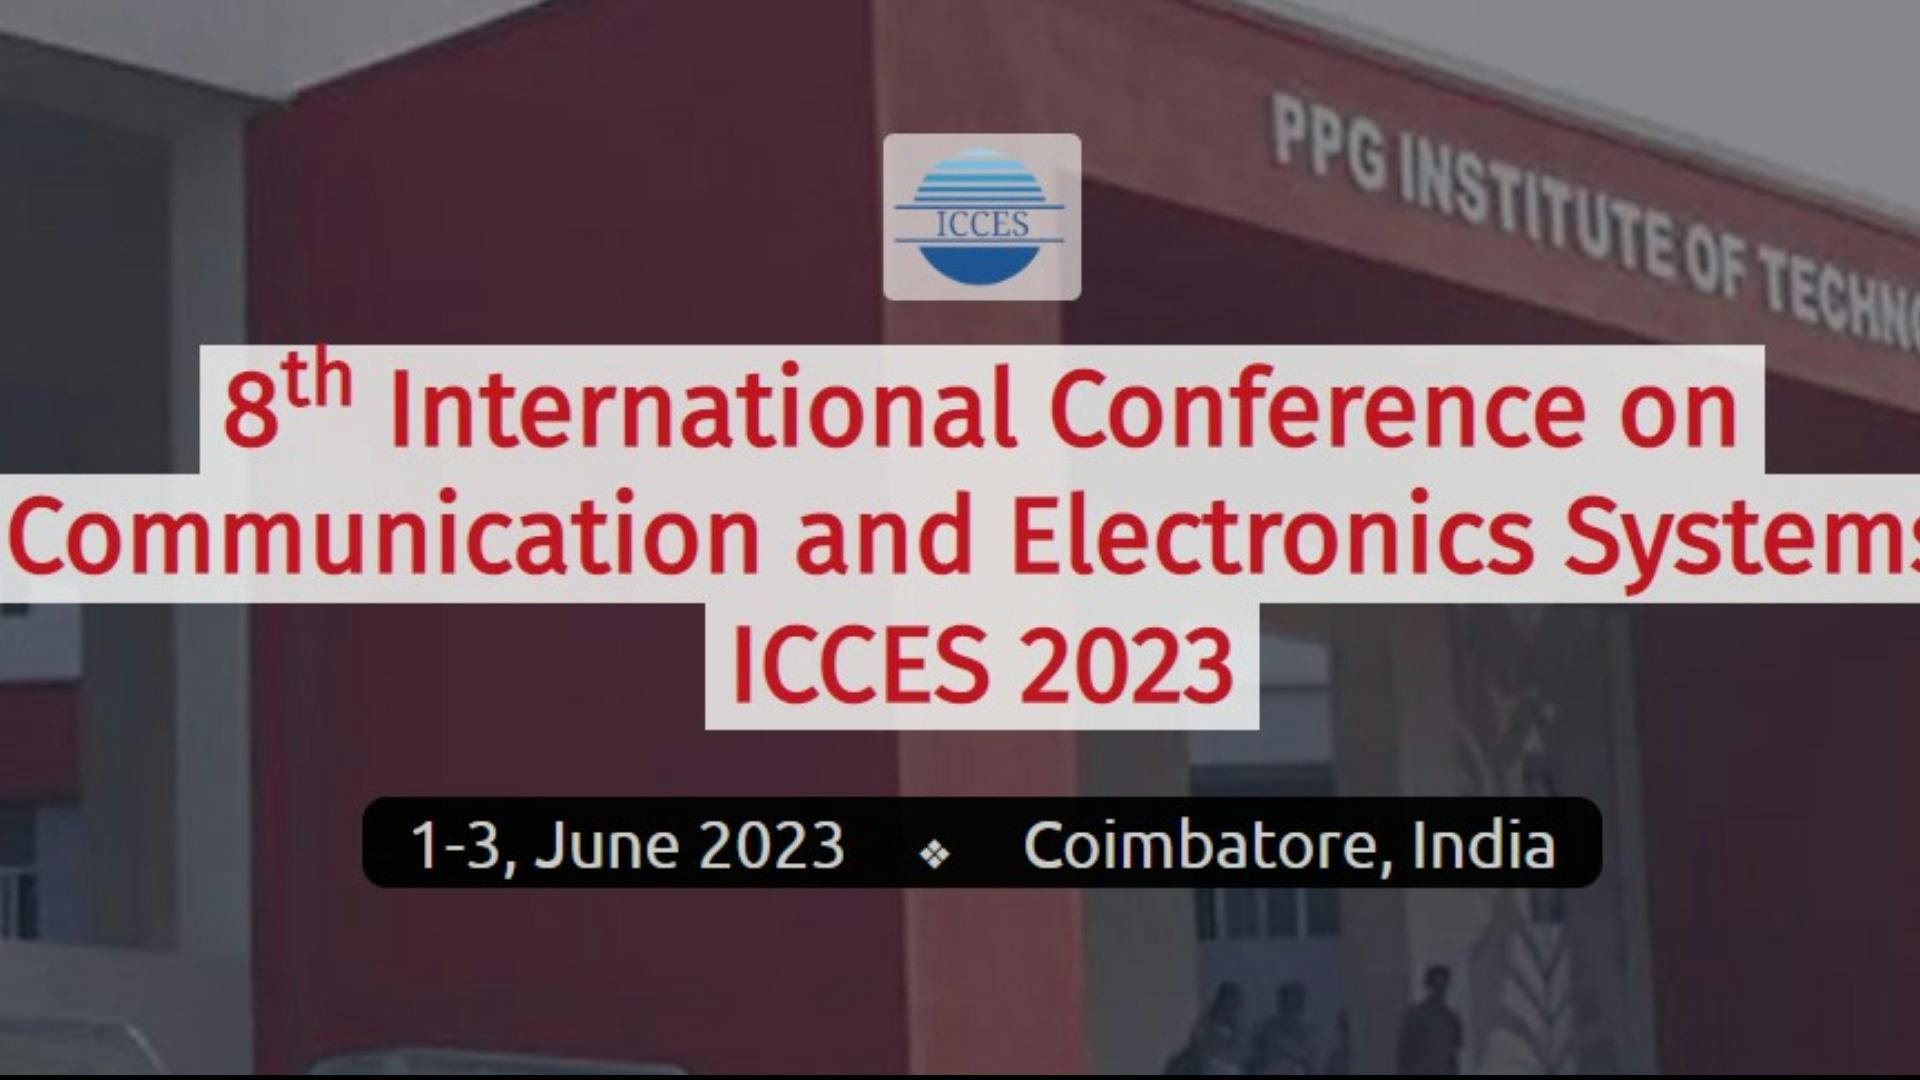 8th International Conference on Communication and Electronics Systems